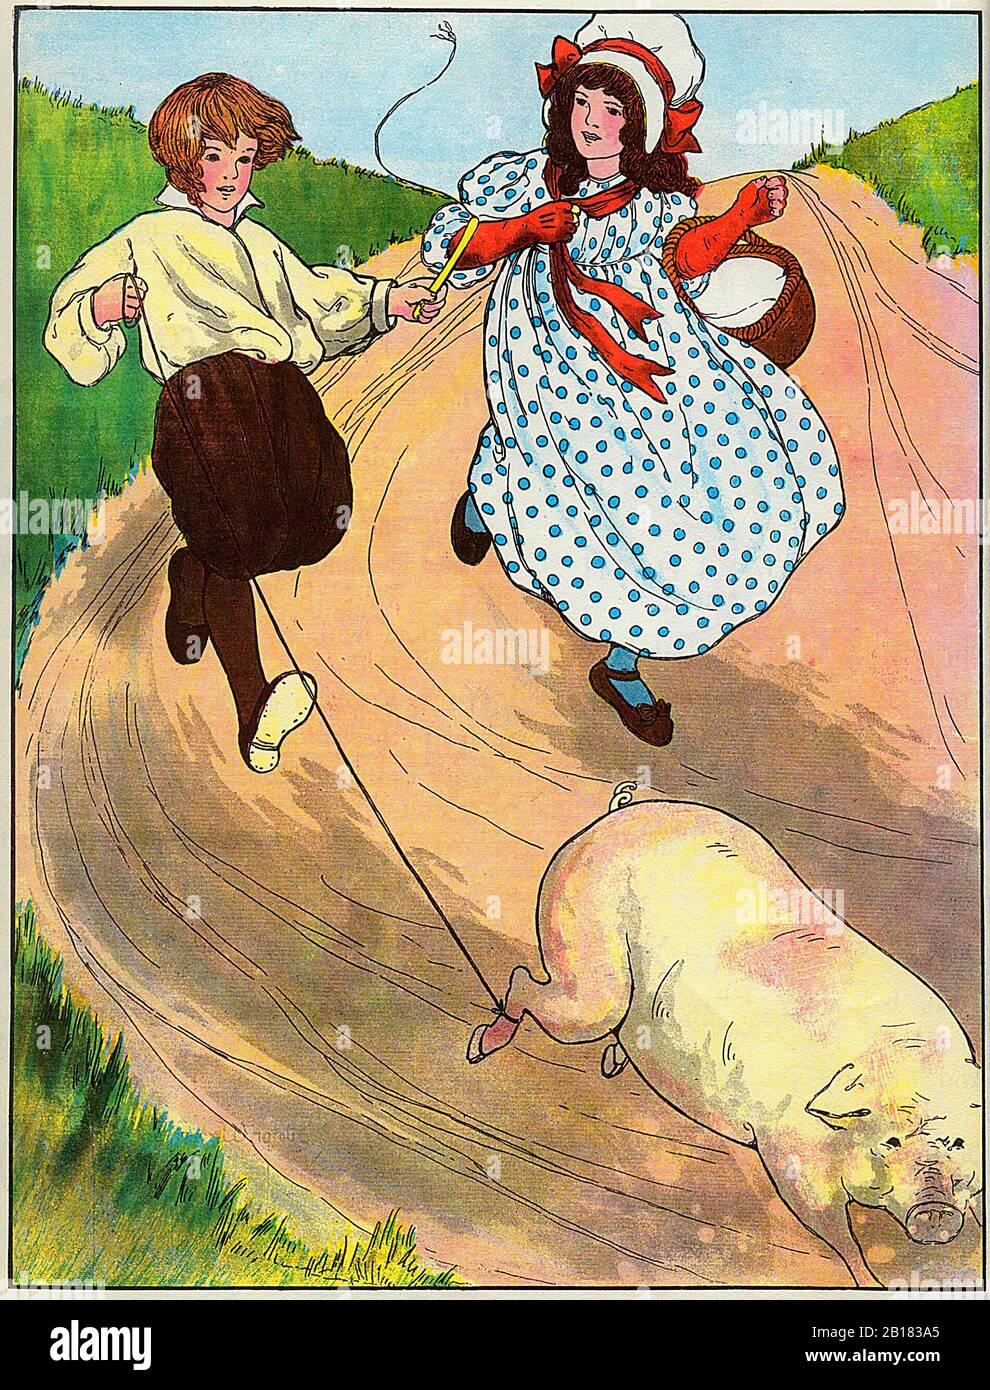 https://c8.alamy.com/comp/2B183A5/to-market-to-market-to-buy-a-fat-pig-the-real-mother-goose-nursery-rhyme-illustration-by-blanche-fisher-wright-circa-1915-2B183A5.jpg